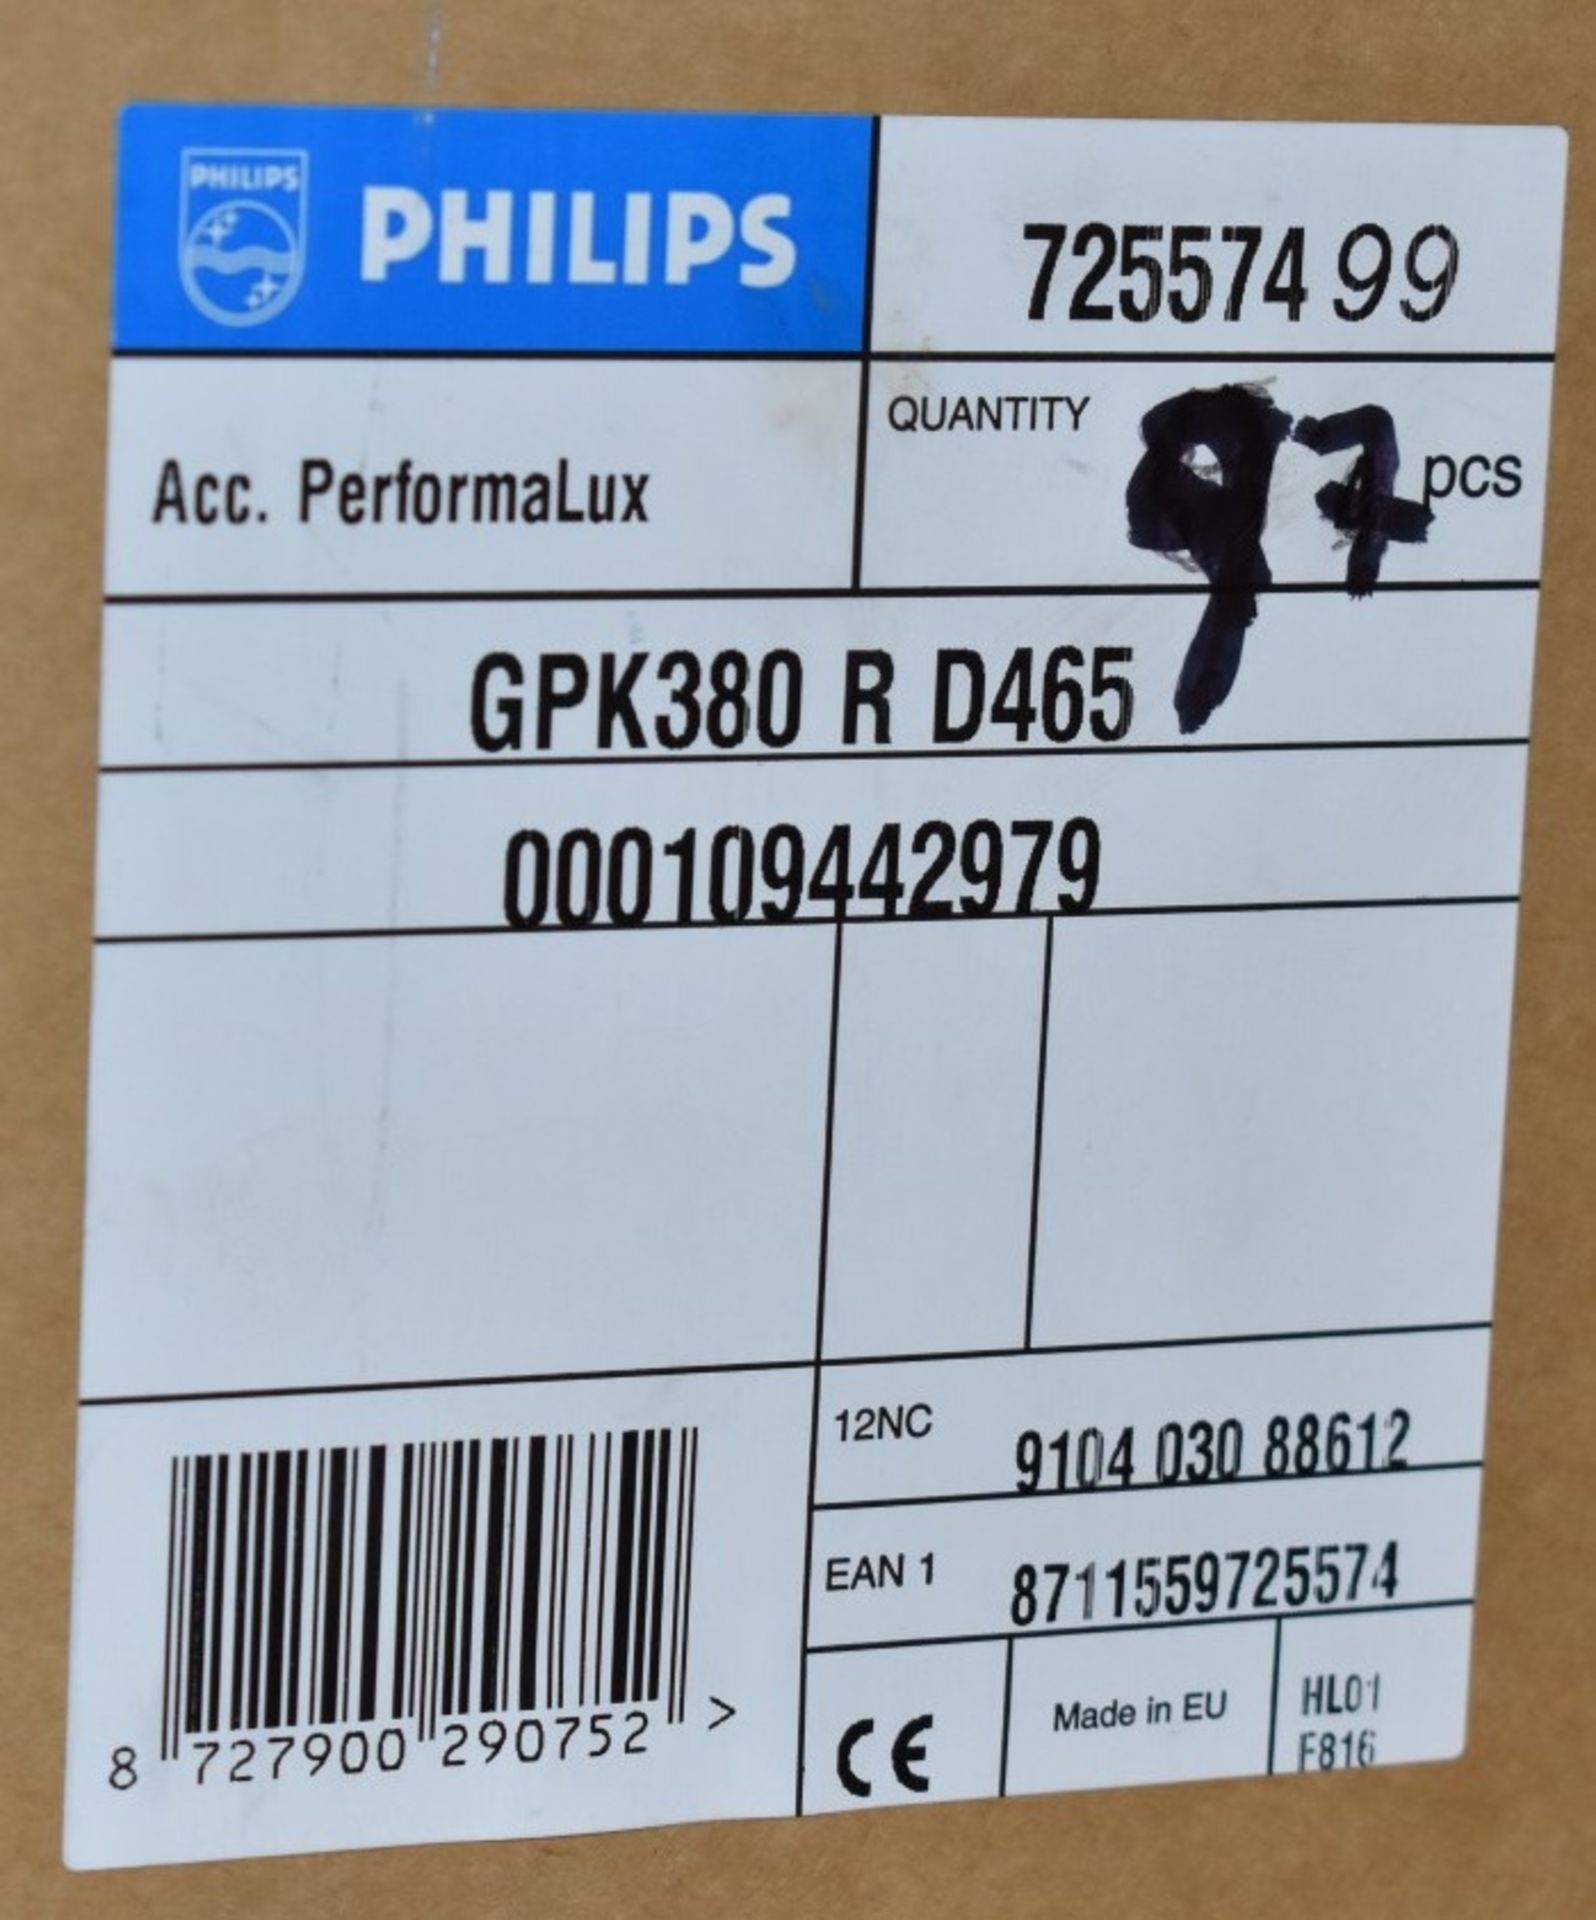 6 x Philips Performalux GPK380 R D465 Reflector for Performalux - Ref: C773 - CL816 - Location: - Image 2 of 2